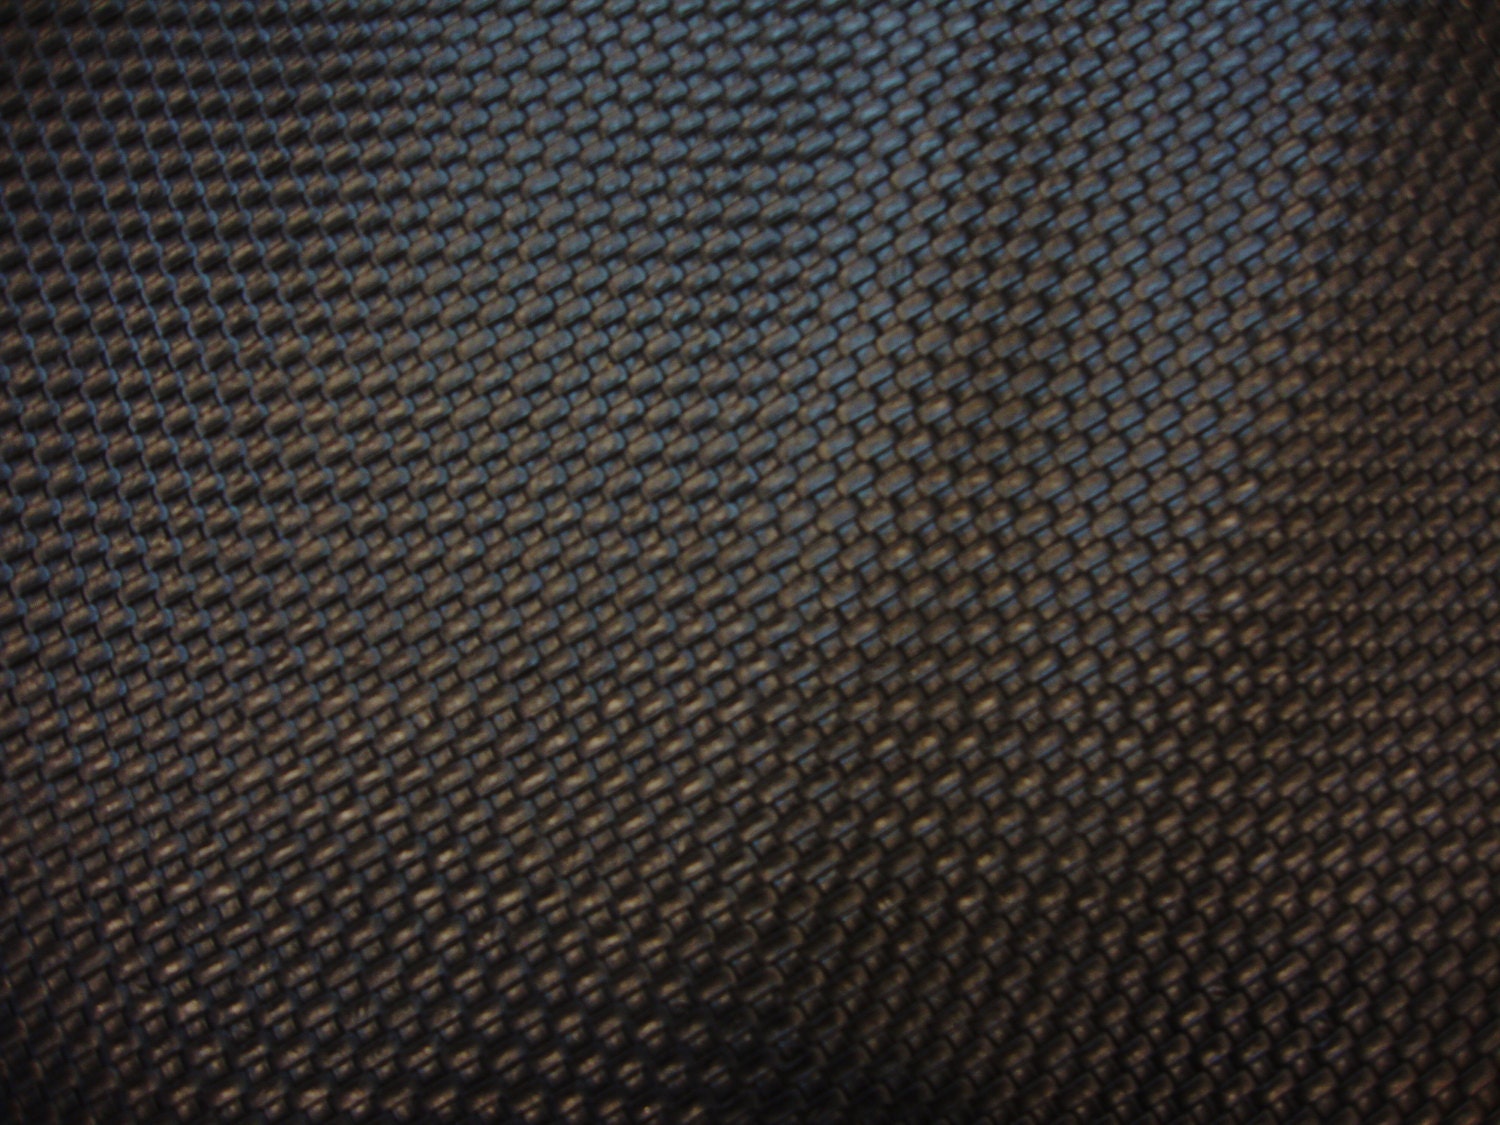 Vinyl Faux Leather Fabric Basket Weave, Upholstery Leather Fabric By The Yard